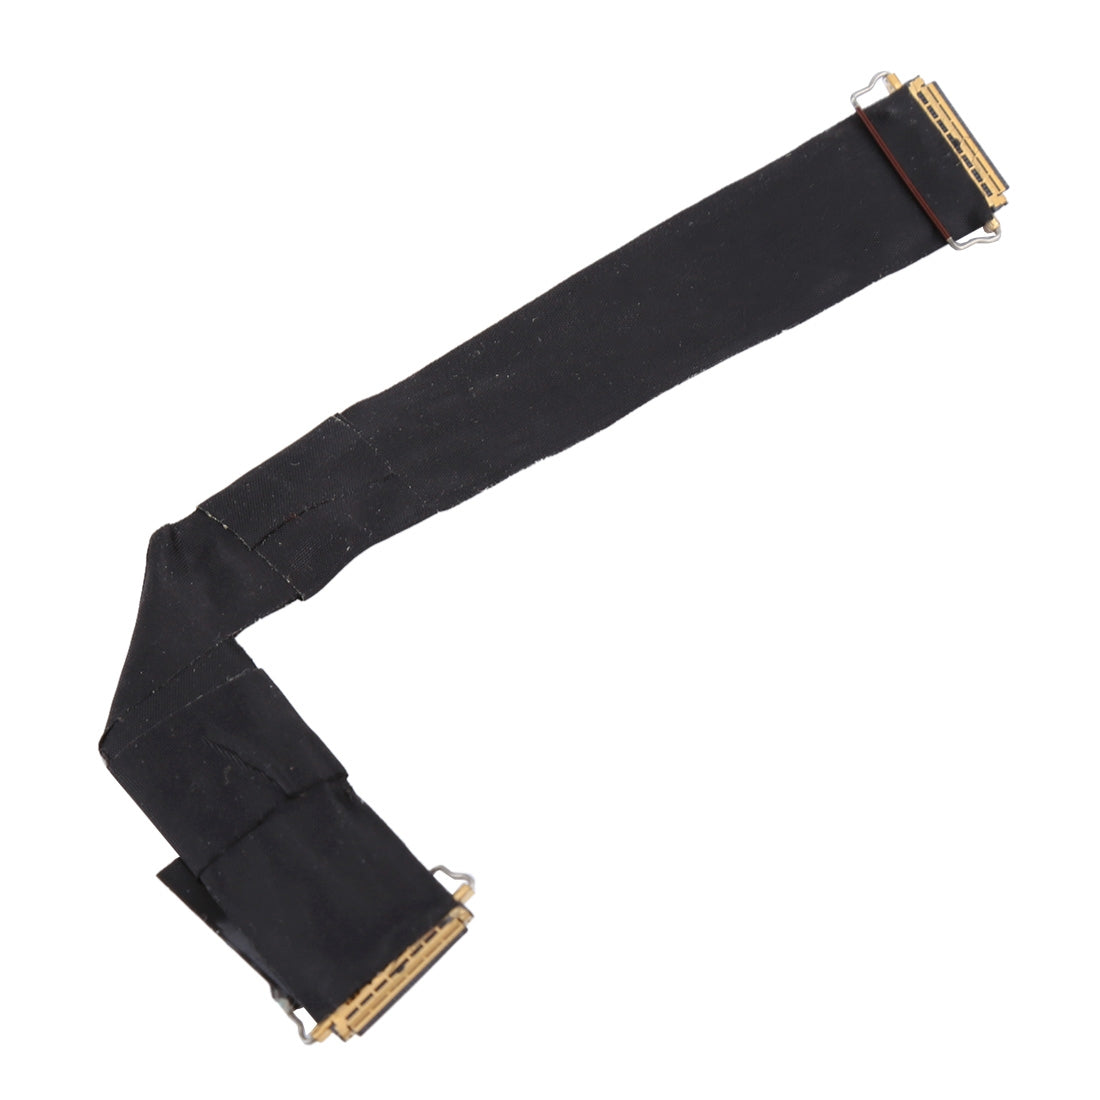 LCD Connector Flex Cable Apple iMac 21.5 A1418 2012 2013